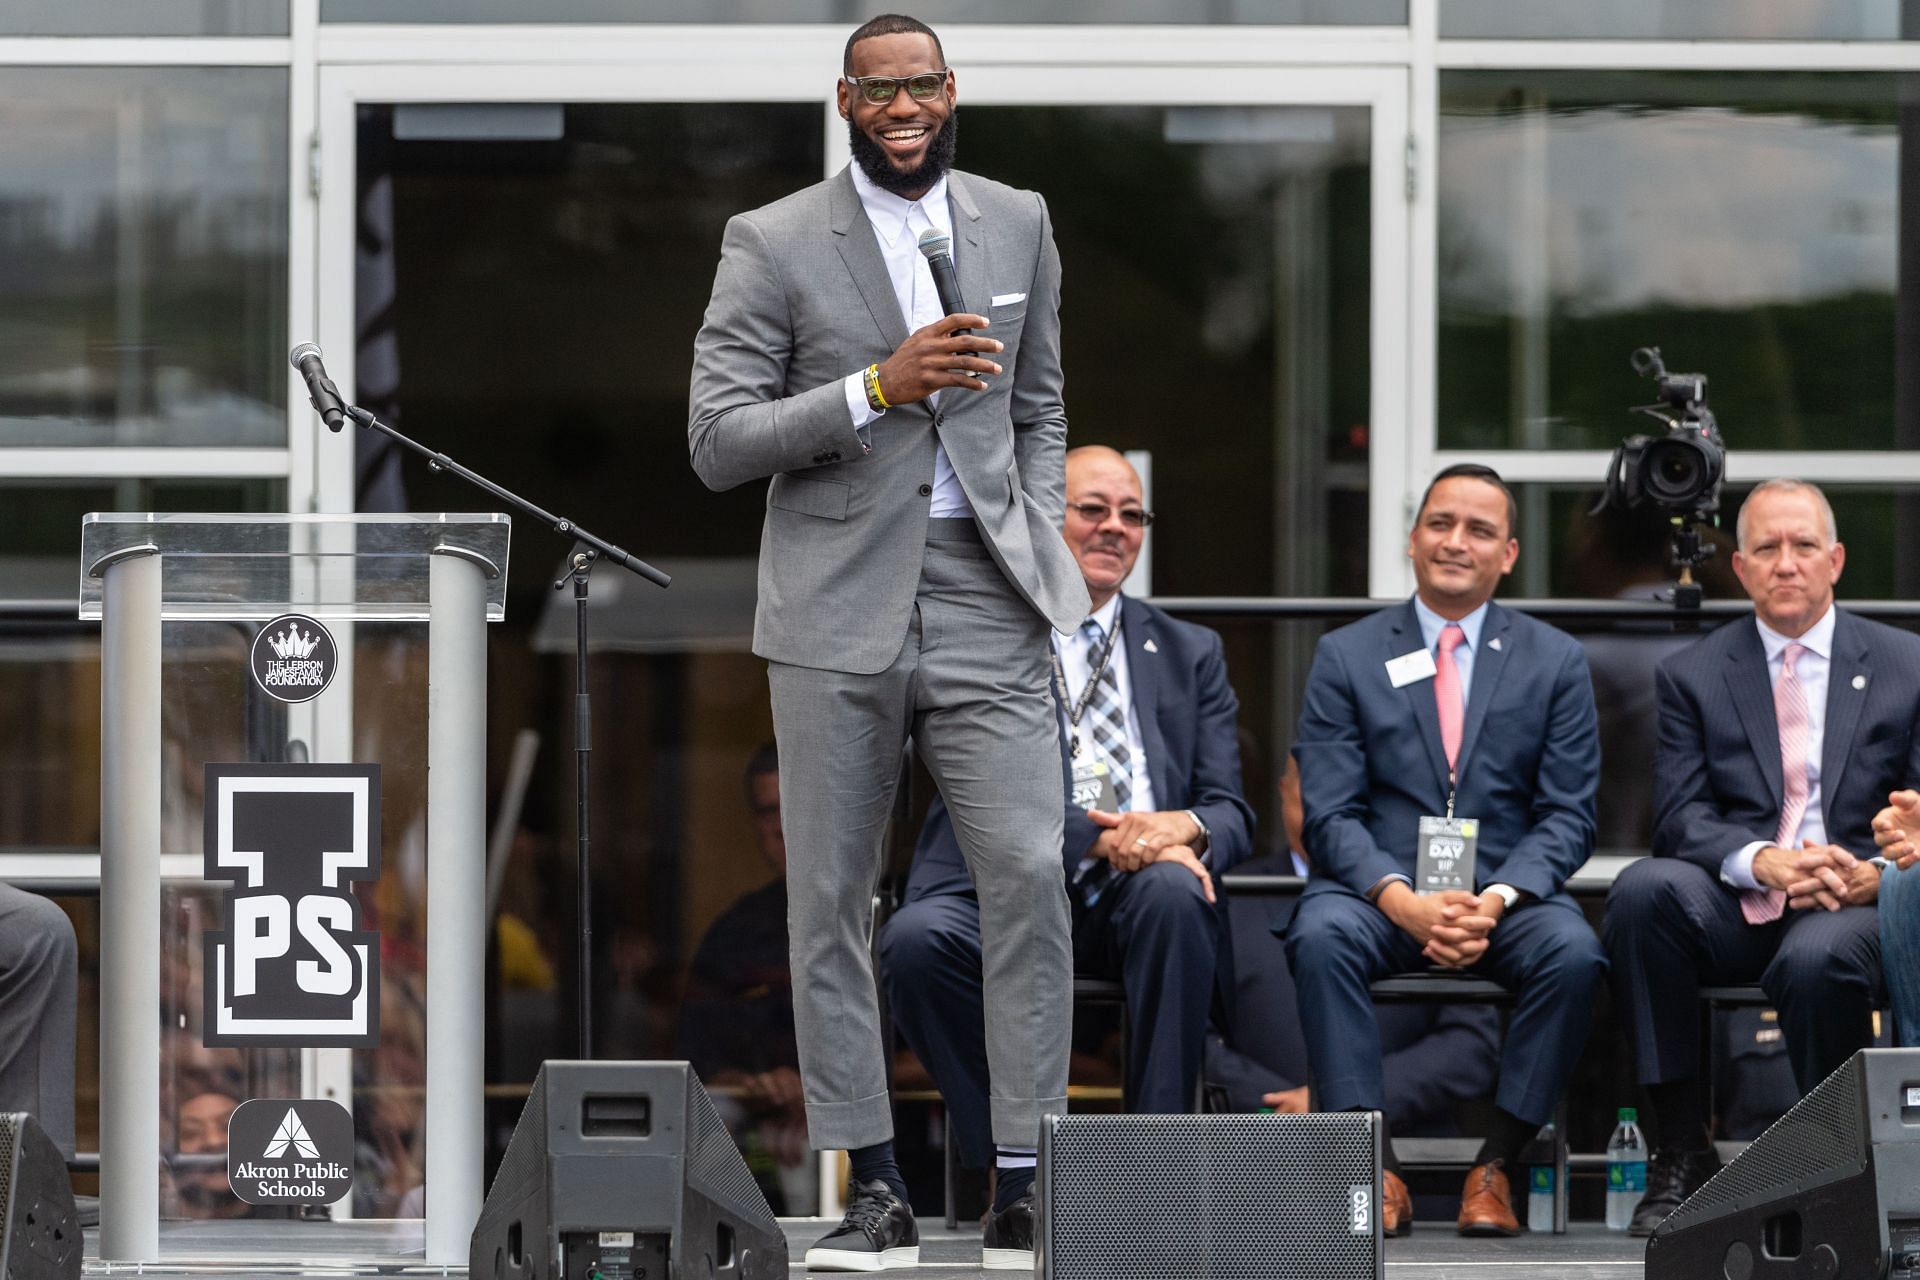 LA Lakers superstar LeBron James continues to shine off the court as well.